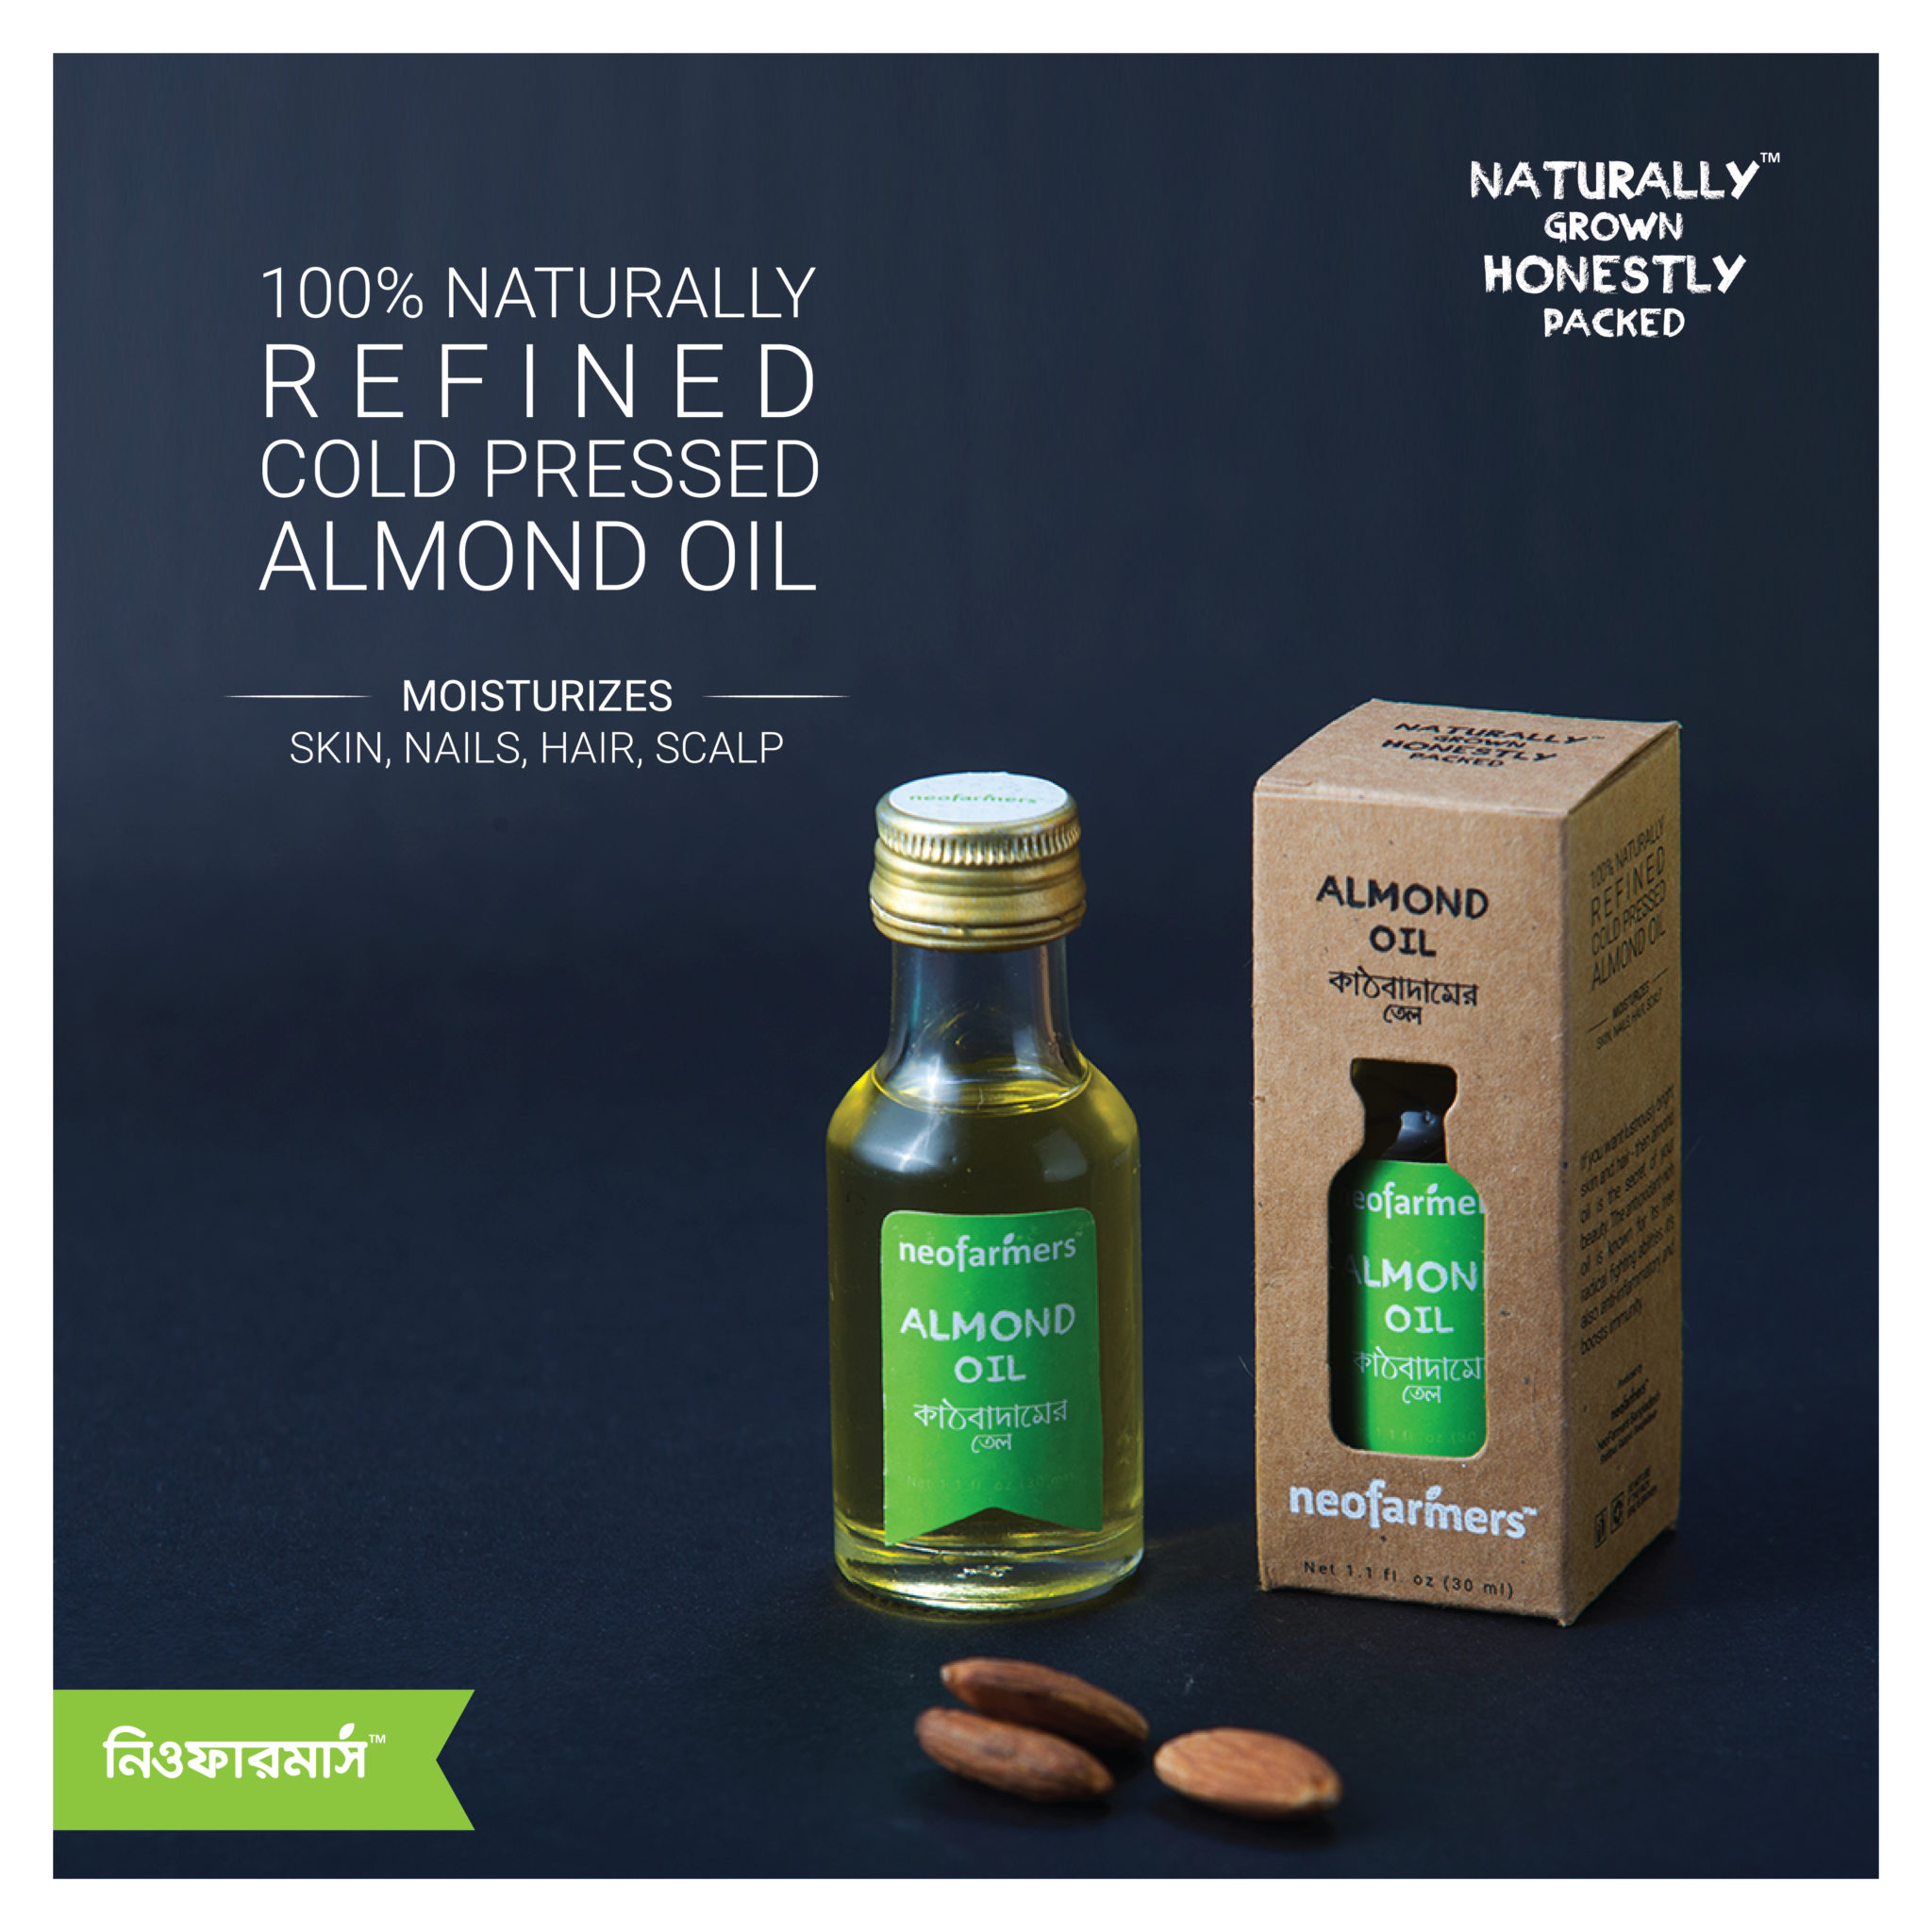 The many (so many!) benefits of Almond oil in life